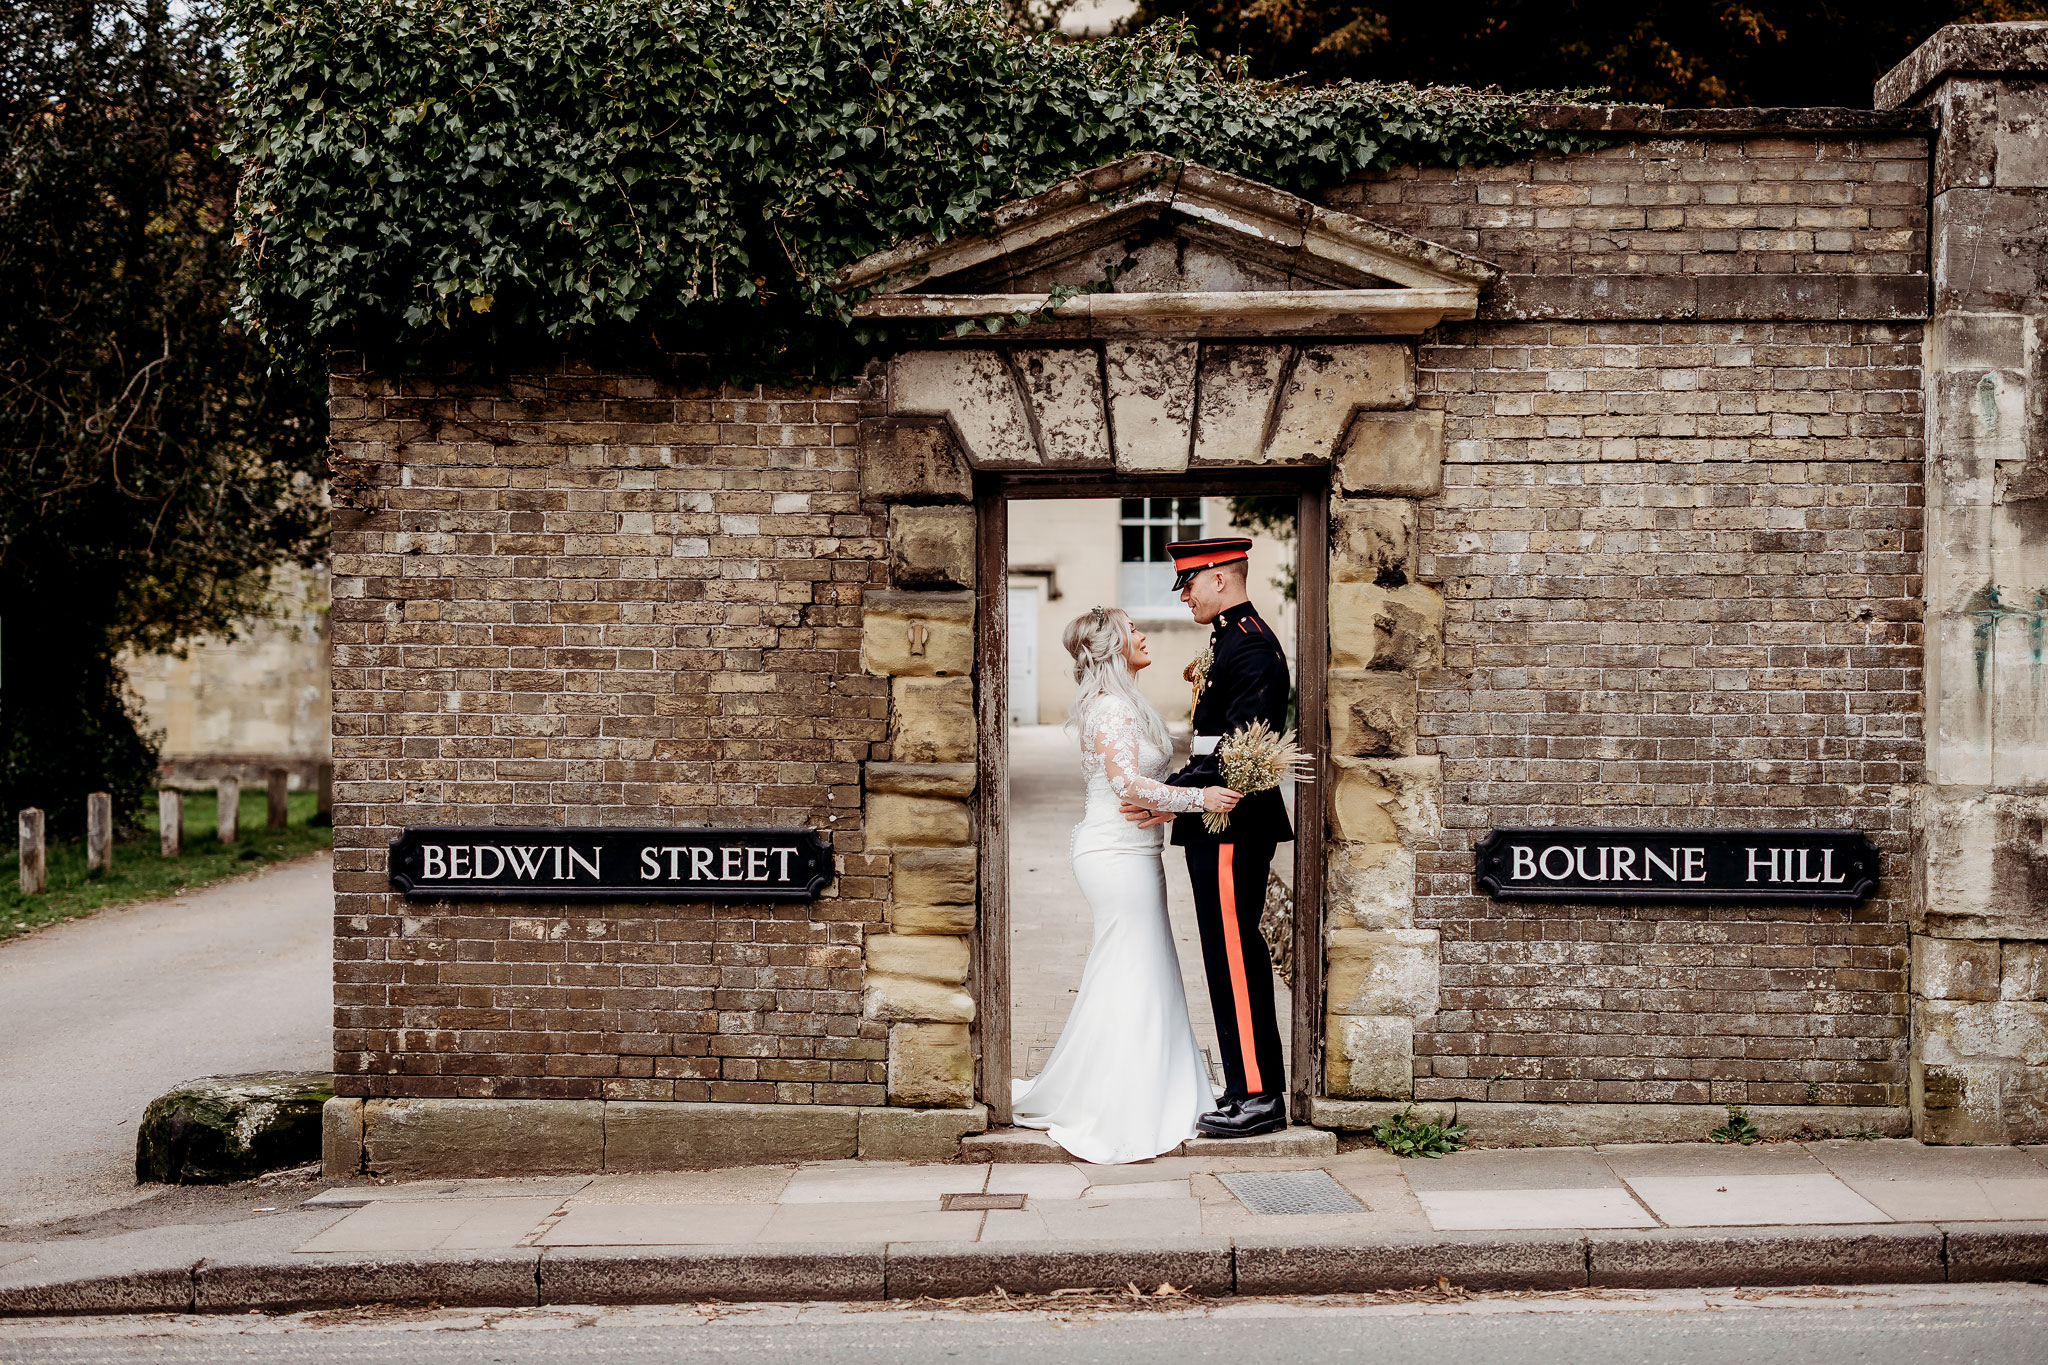 The bride and groom standing under a archway at salisbury registry office